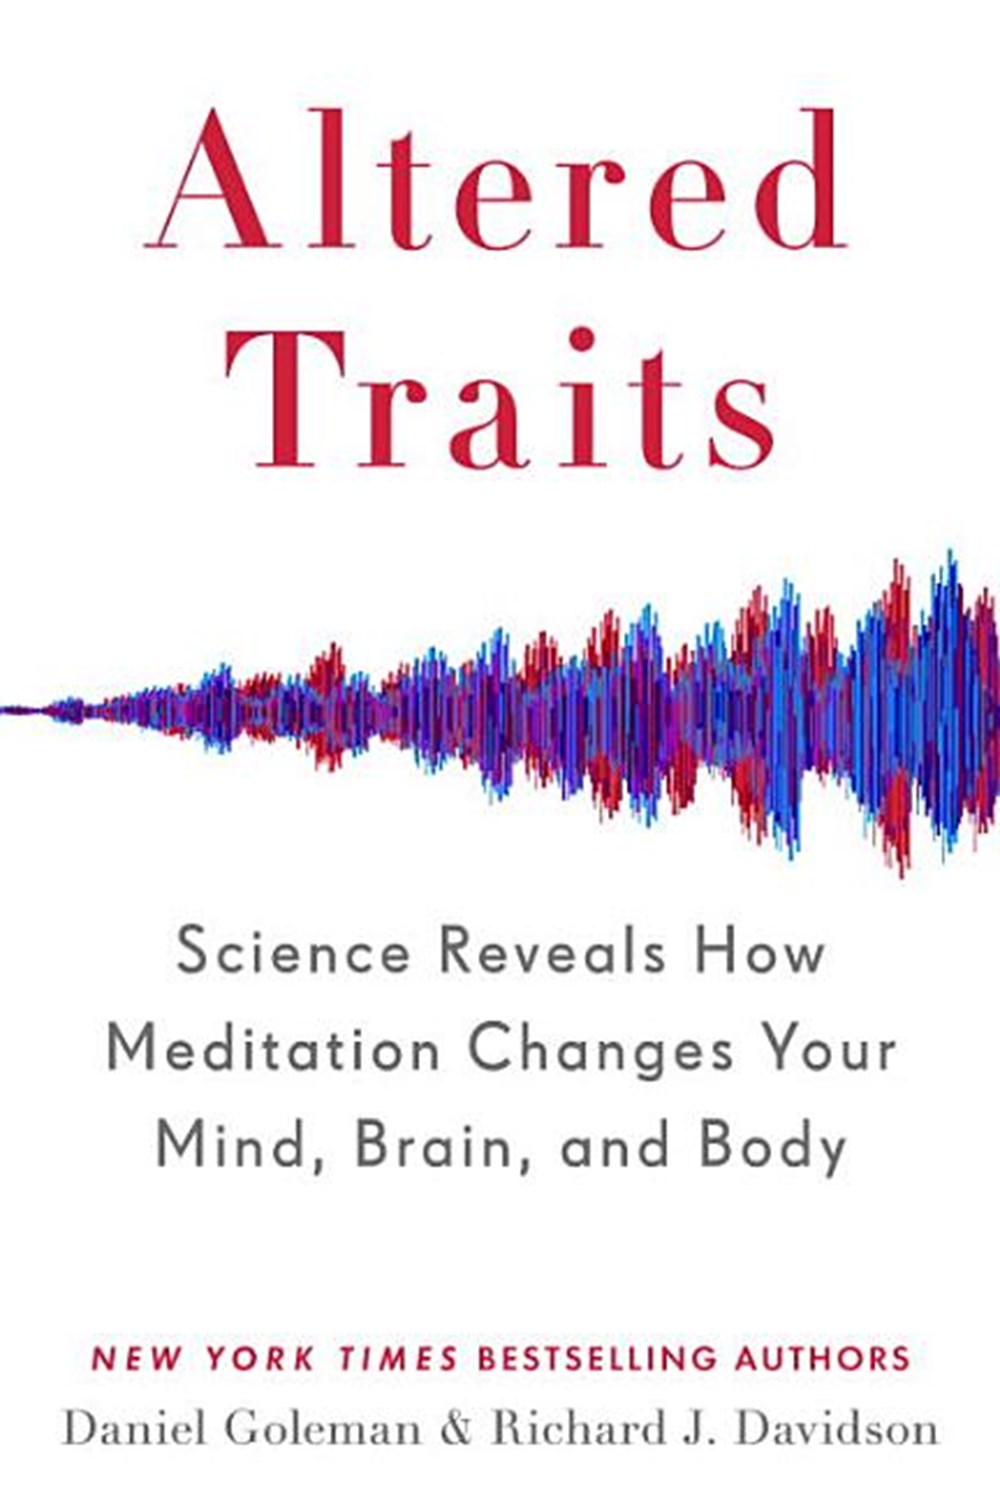 Altered Traits Science Reveals How Meditation Changes Your Mind, Brain, and Body